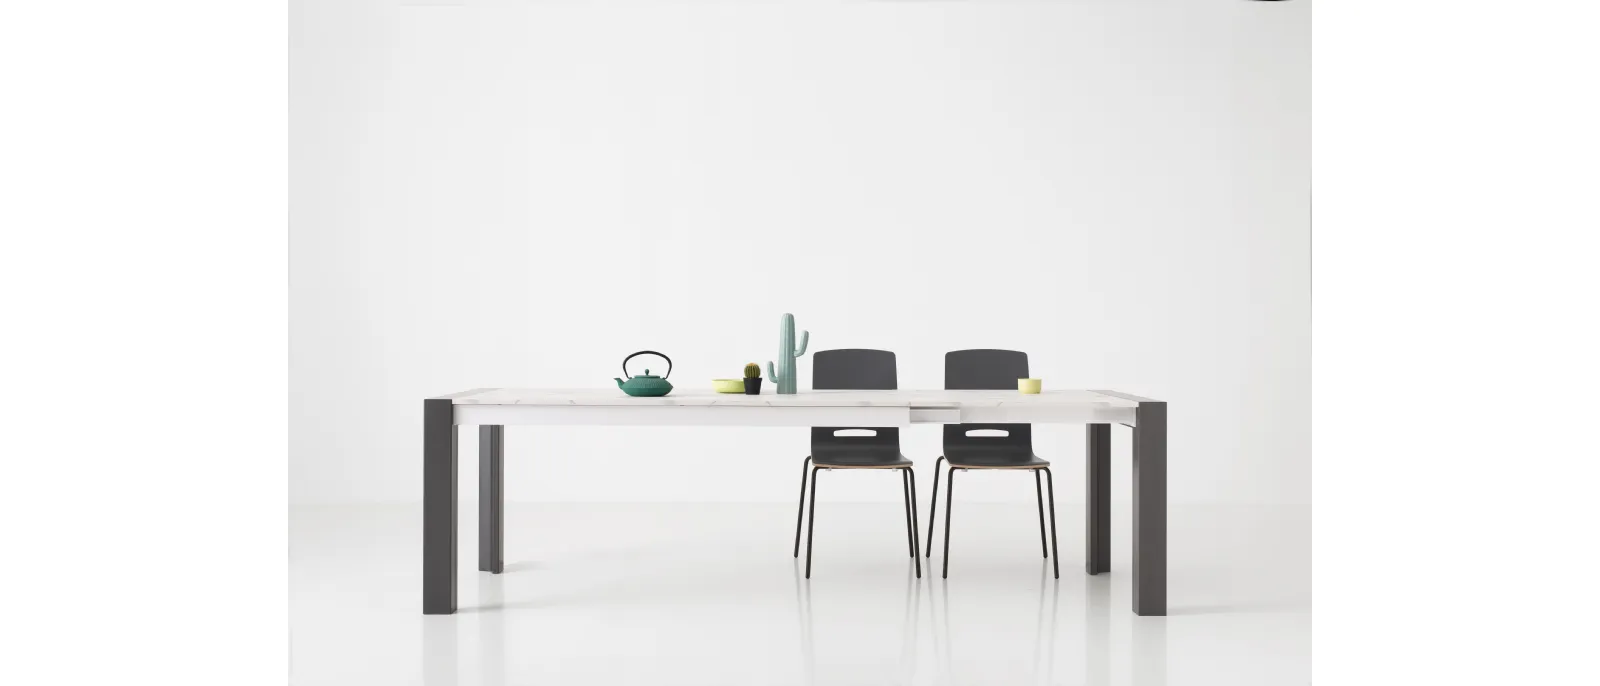 Milano table by Pointhouse